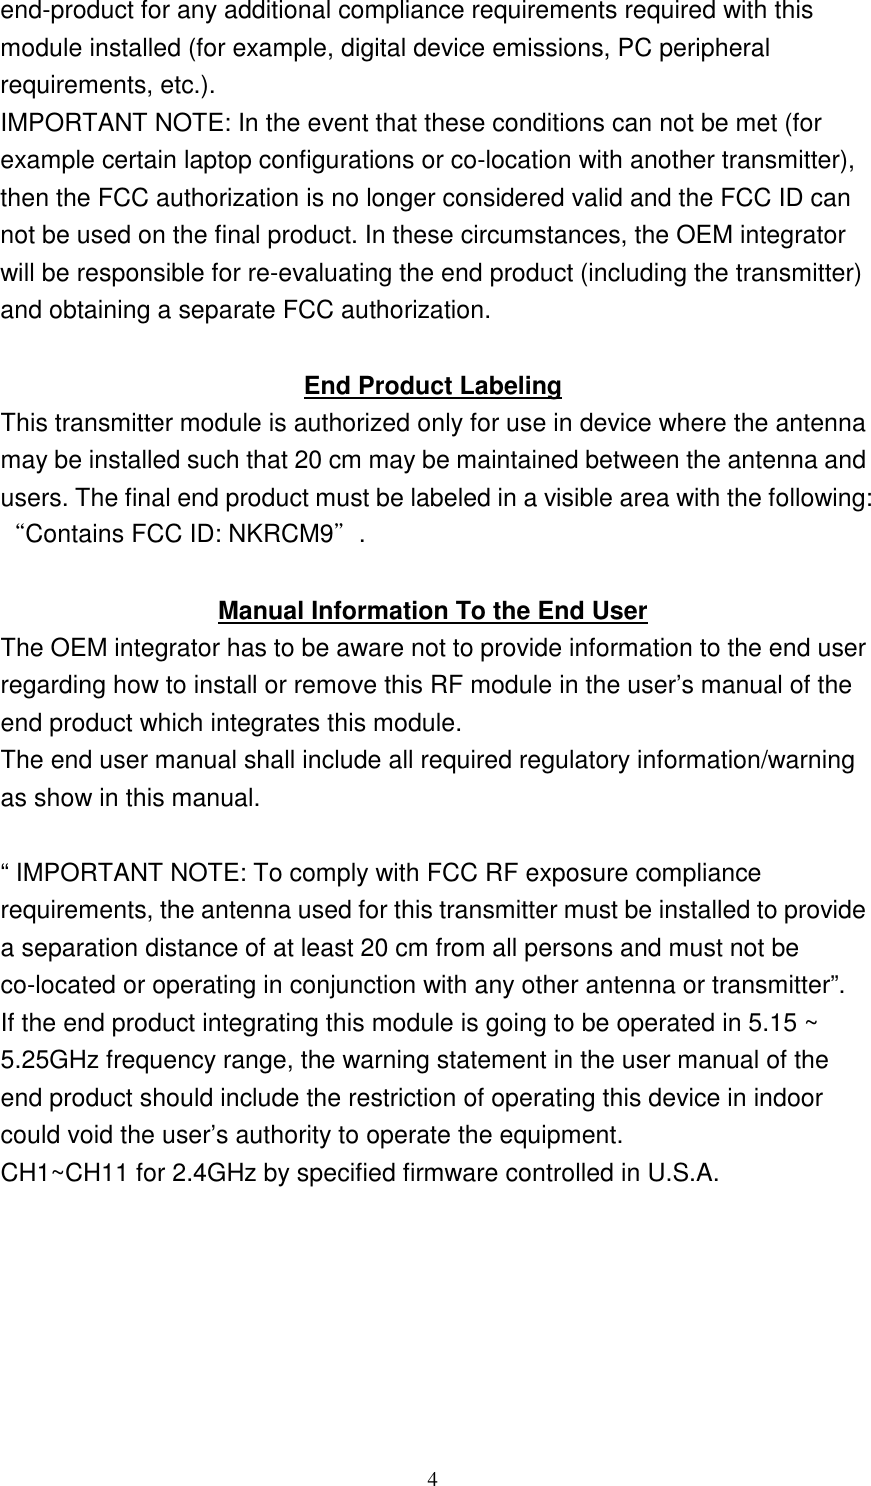   4 end-product for any additional compliance requirements required with this module installed (for example, digital device emissions, PC peripheral requirements, etc.). IMPORTANT NOTE: In the event that these conditions can not be met (for example certain laptop configurations or co-location with another transmitter), then the FCC authorization is no longer considered valid and the FCC ID can not be used on the final product. In these circumstances, the OEM integrator will be responsible for re-evaluating the end product (including the transmitter) and obtaining a separate FCC authorization.  End Product Labeling This transmitter module is authorized only for use in device where the antenna may be installed such that 20 cm may be maintained between the antenna and users. The final end product must be labeled in a visible area with the following: “Contains FCC ID: NKRCM9”.  Manual Information To the End User The OEM integrator has to be aware not to provide information to the end user regarding how to install or remove this RF module in the user’s manual of the end product which integrates this module. The end user manual shall include all required regulatory information/warning as show in this manual.  “ IMPORTANT NOTE: To comply with FCC RF exposure compliance requirements, the antenna used for this transmitter must be installed to provide a separation distance of at least 20 cm from all persons and must not be co-located or operating in conjunction with any other antenna or transmitter”. If the end product integrating this module is going to be operated in 5.15 ~ 5.25GHz frequency range, the warning statement in the user manual of the end product should include the restriction of operating this device in indoor could void the user’s authority to operate the equipment. CH1~CH11 for 2.4GHz by specified firmware controlled in U.S.A. 